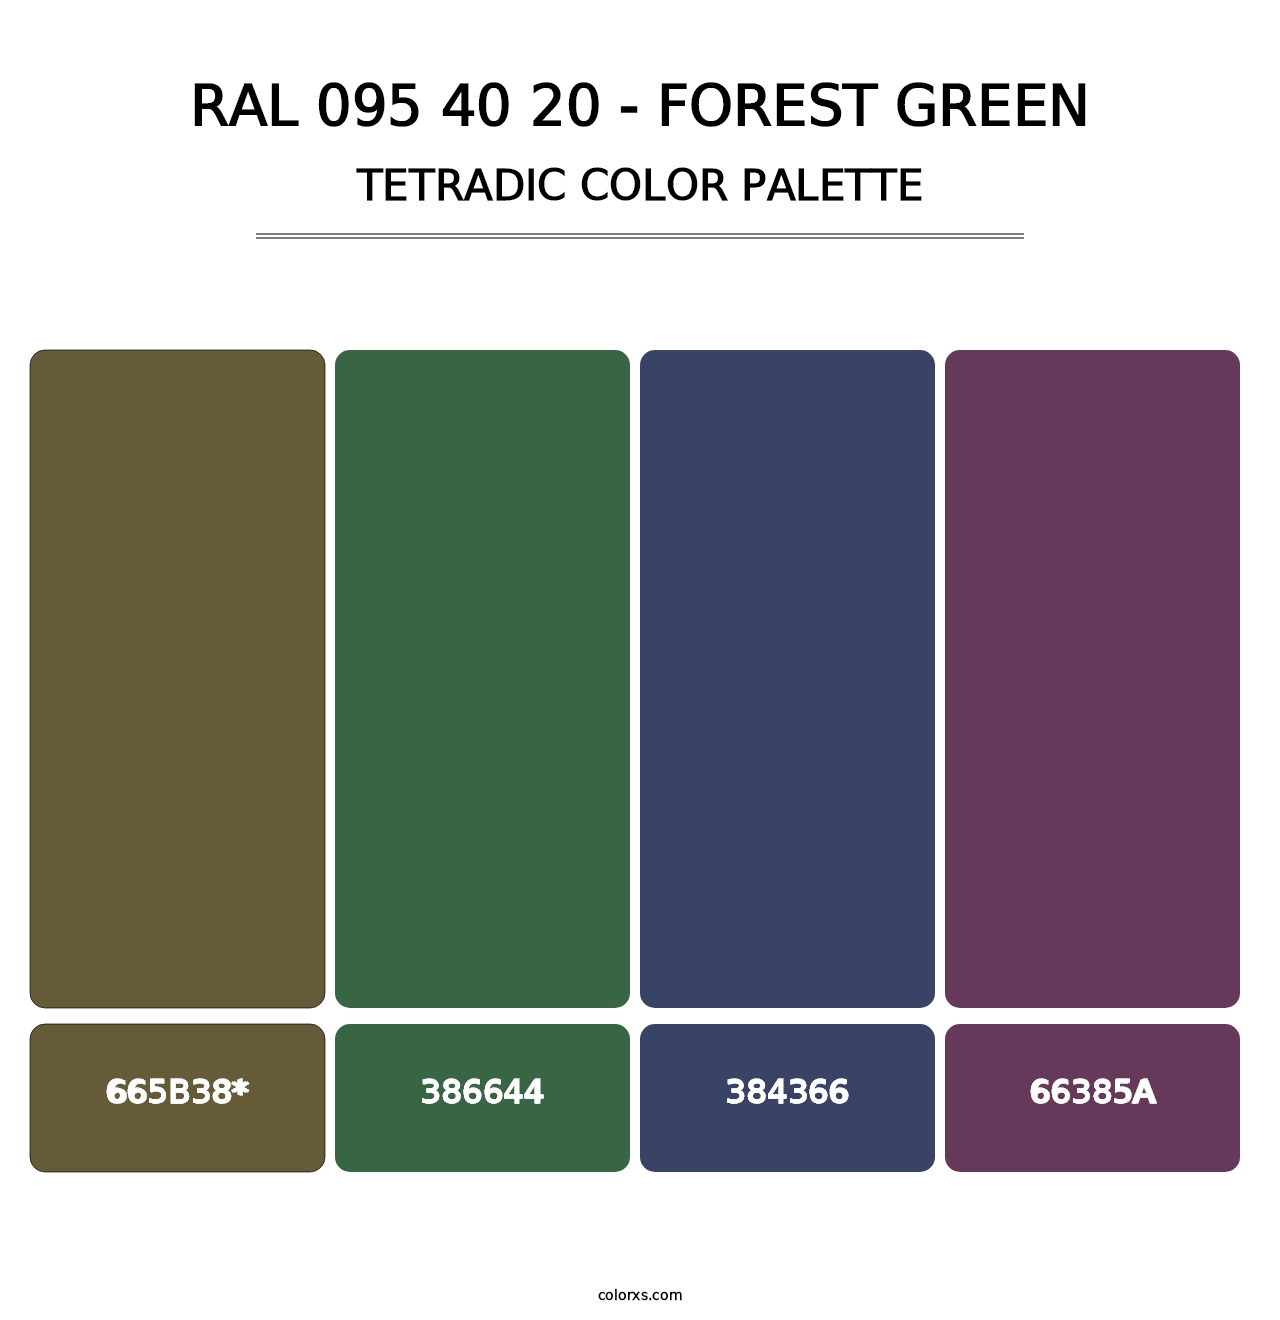 RAL 095 40 20 - Forest Green - Tetradic Color Palette